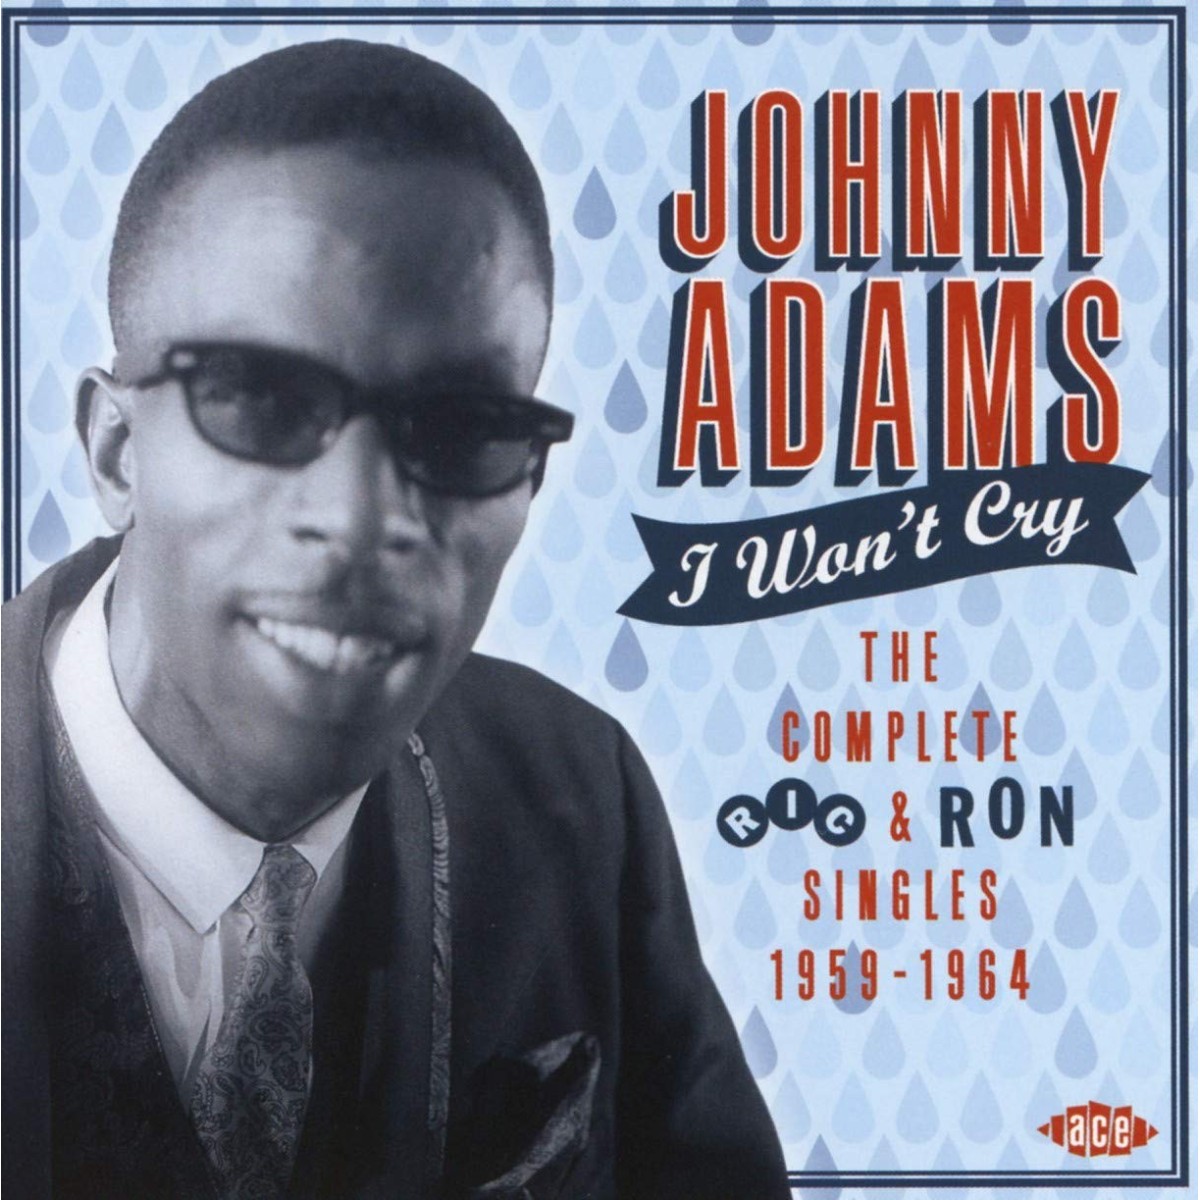 Johnny Adams - I Won't Cry - The Complete Ric & Ronsingles 1959-1964